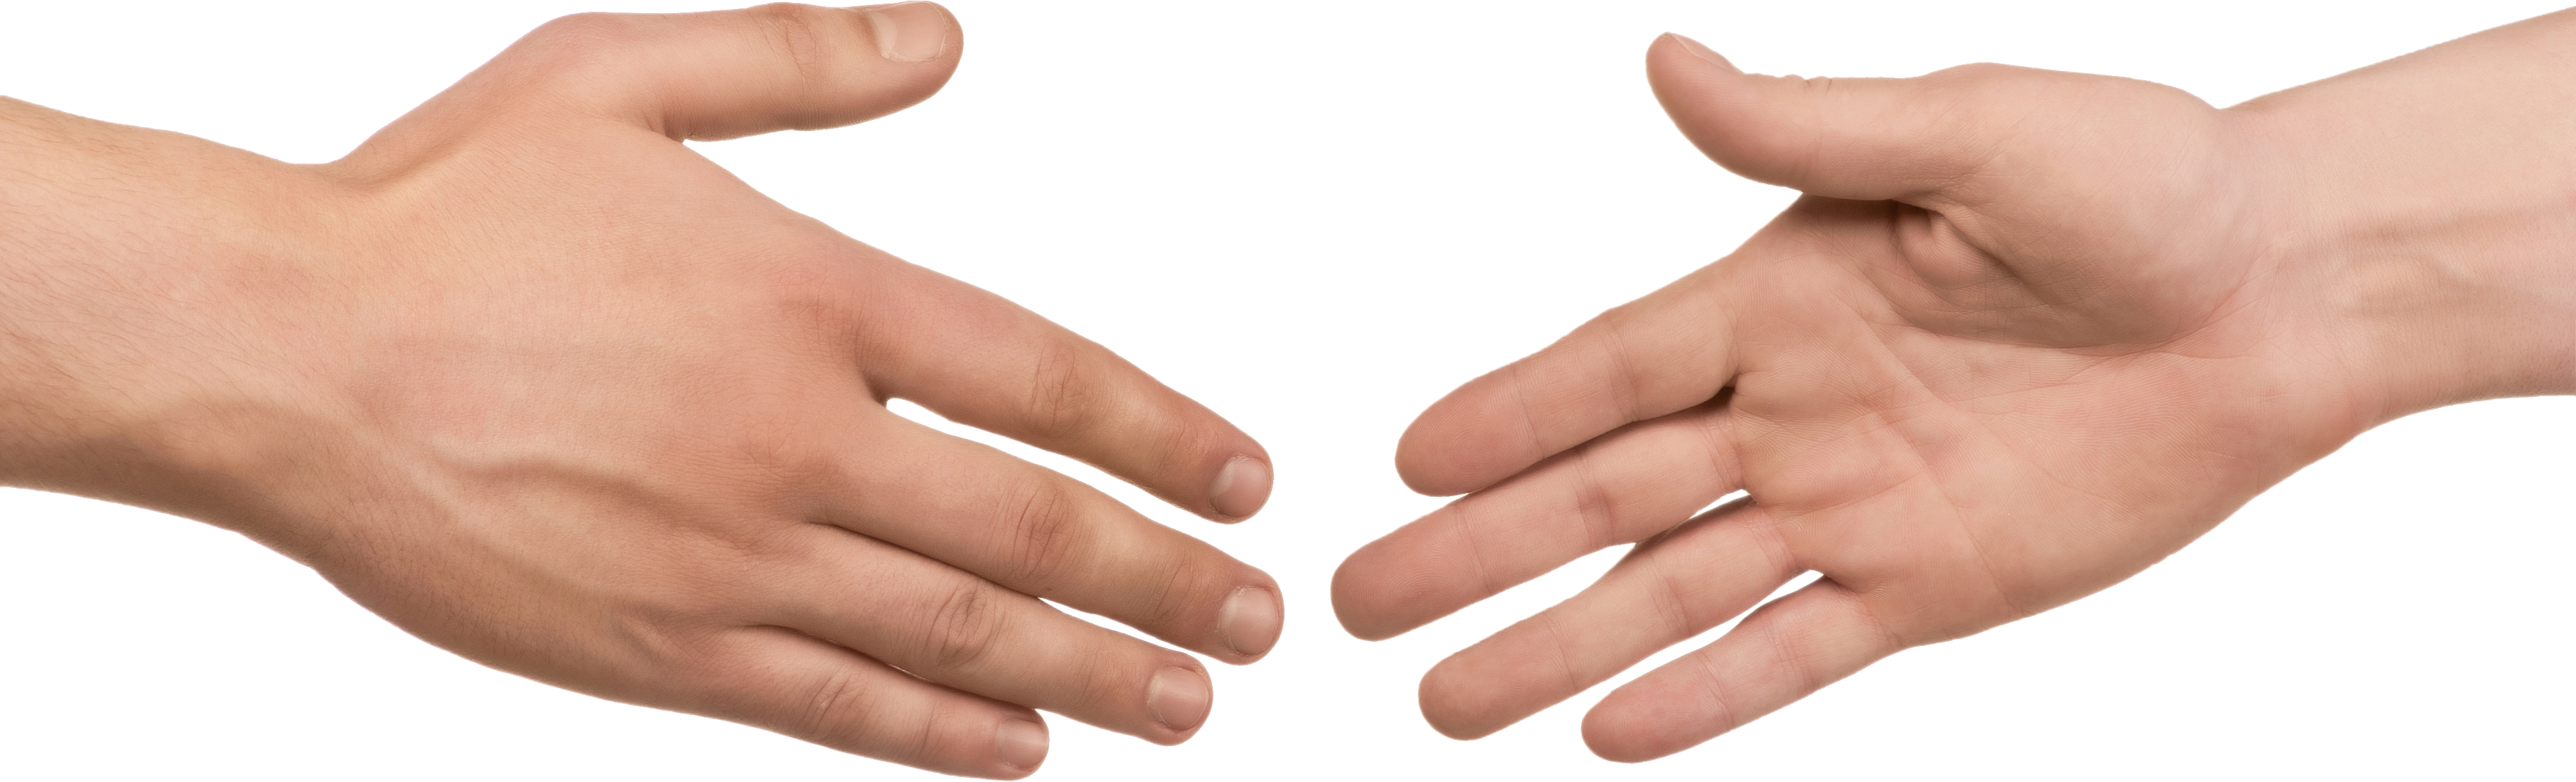 Two hands clipart free images